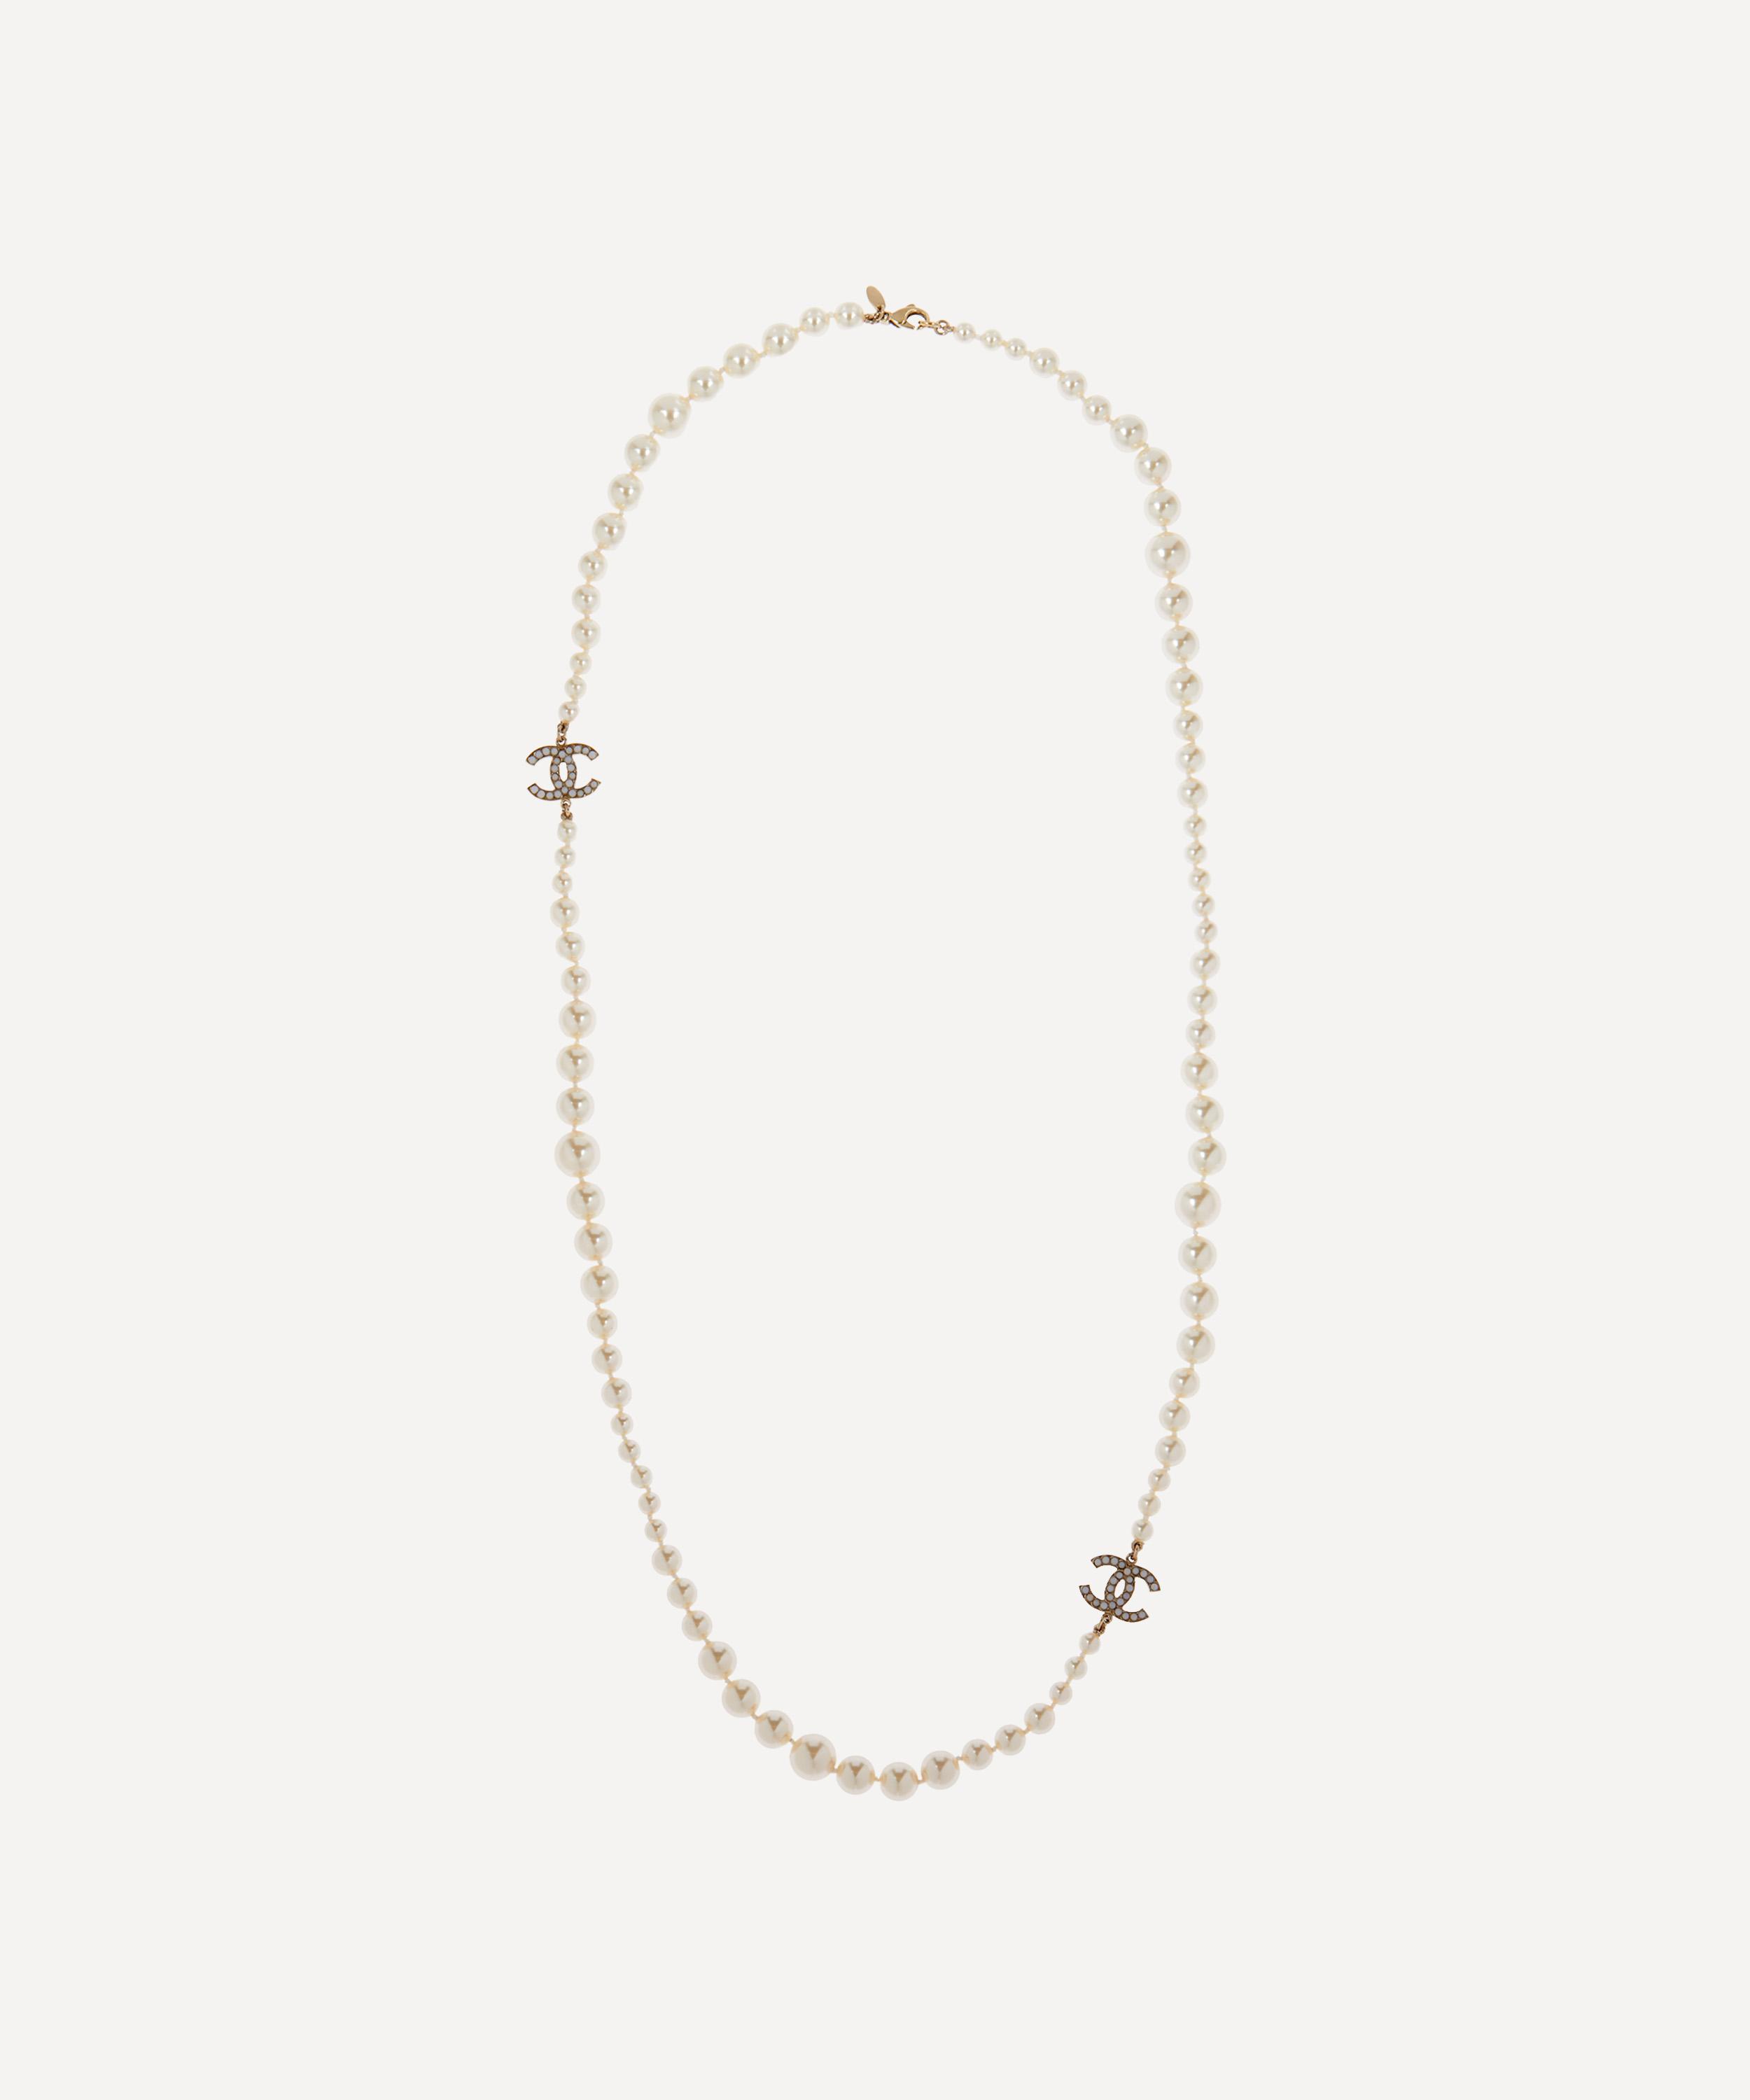 Chanel 2011 44 Long Black & Pewter Beaded Faux Pearl Chain Necklace